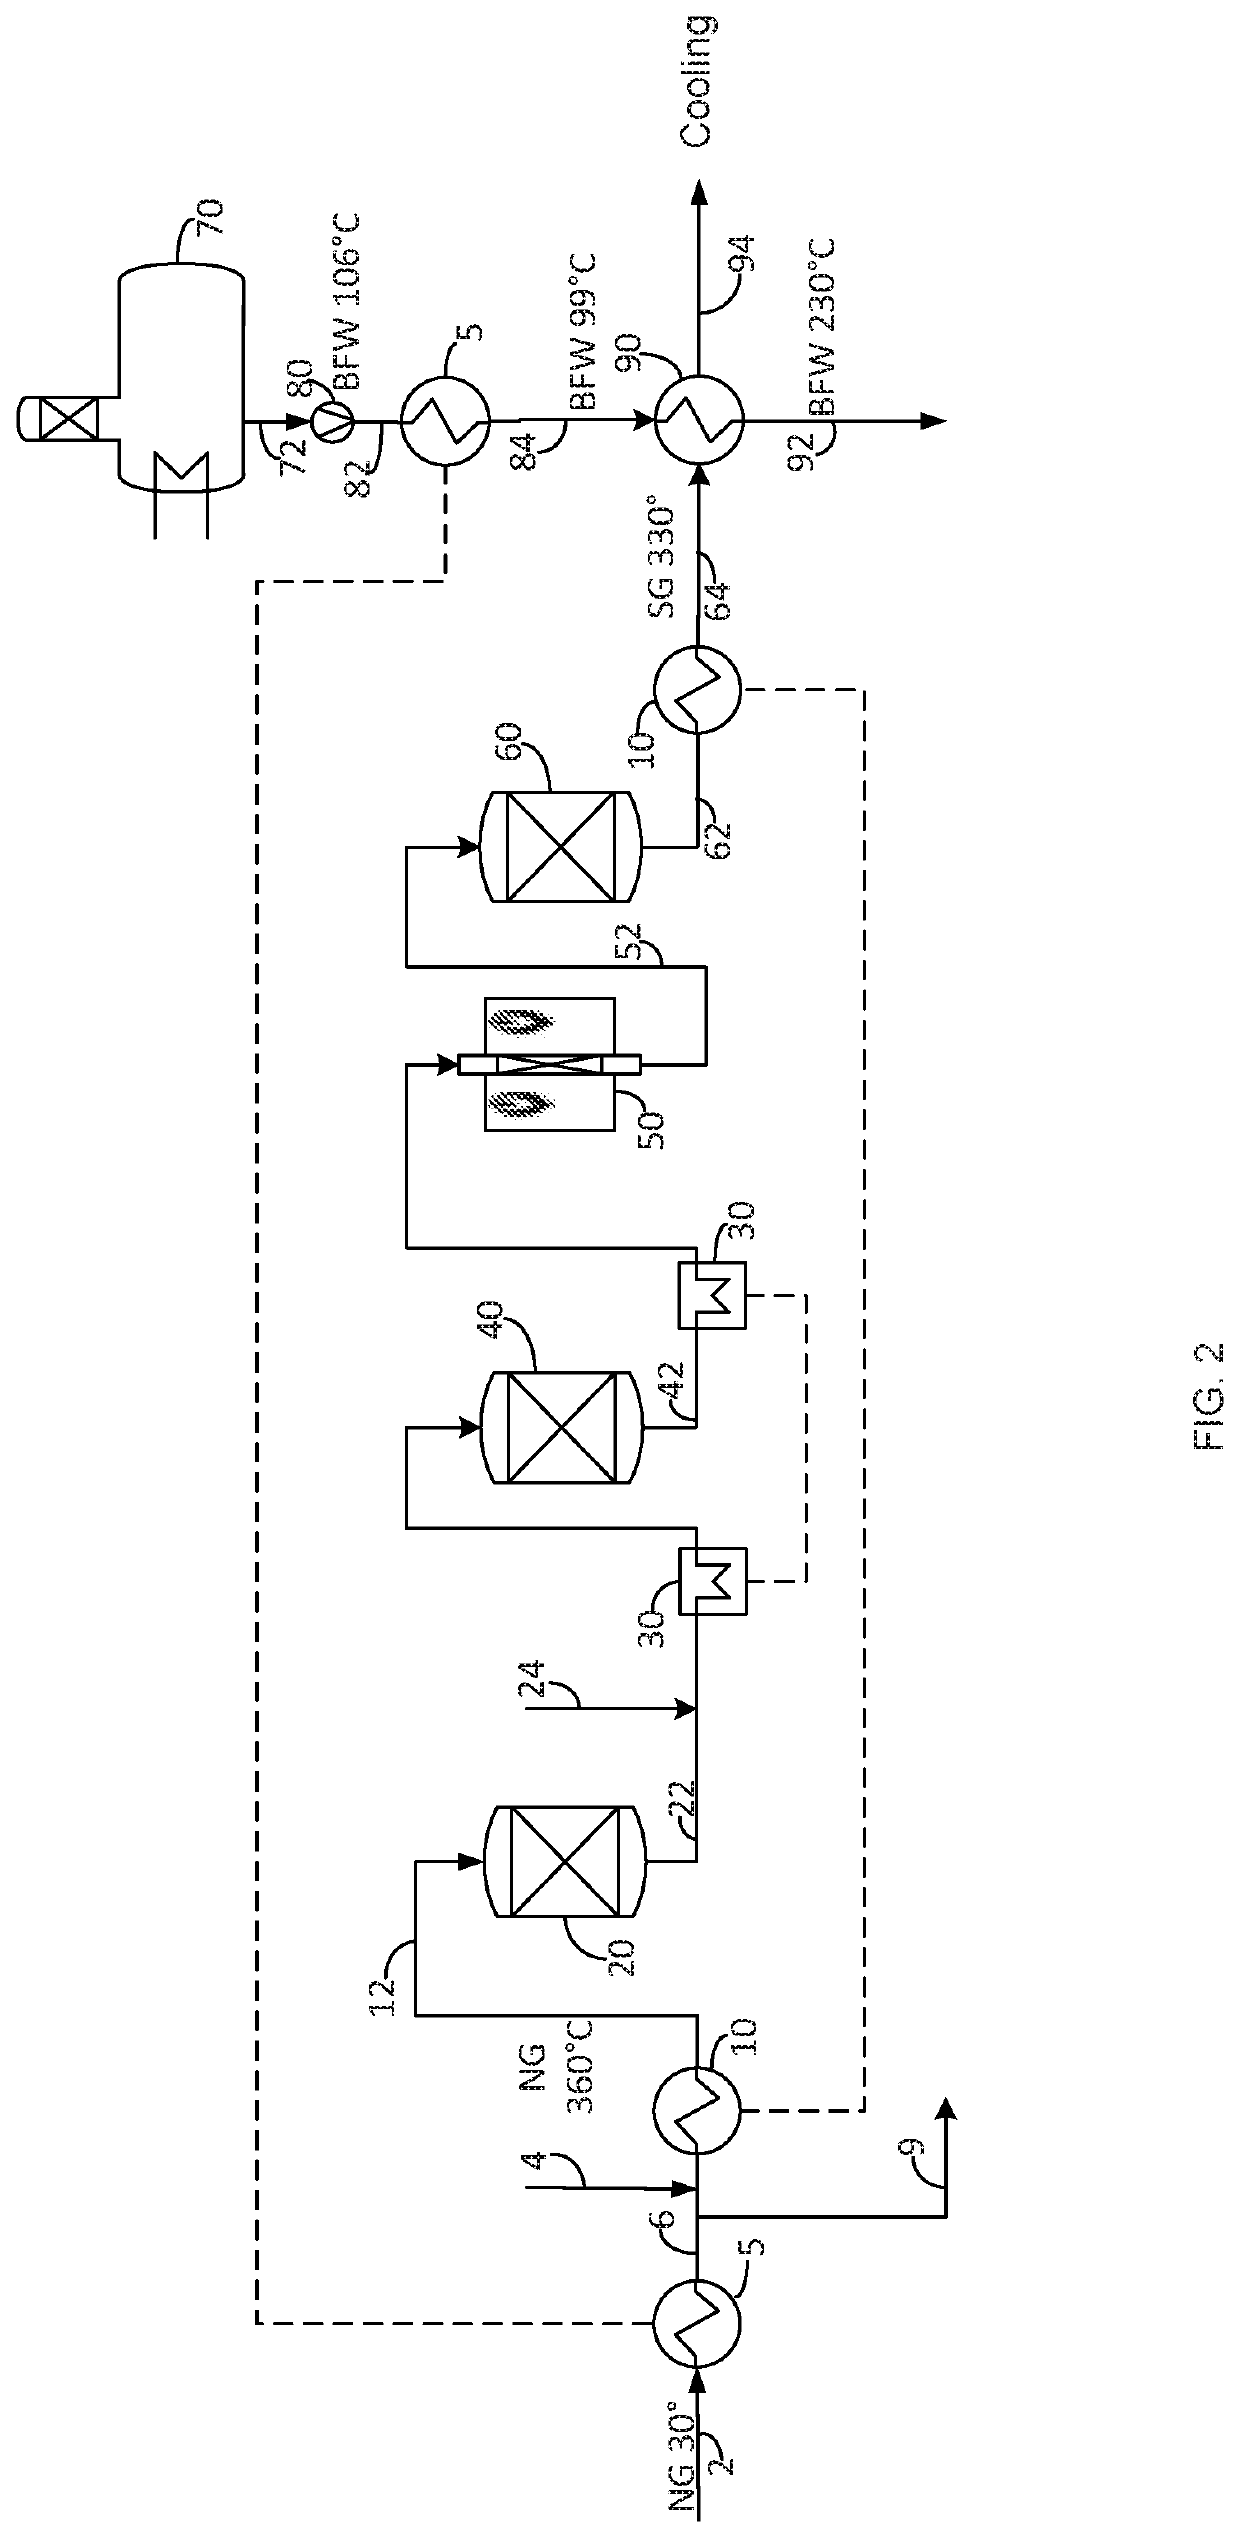 Method for improving thermal efficiency of steam production